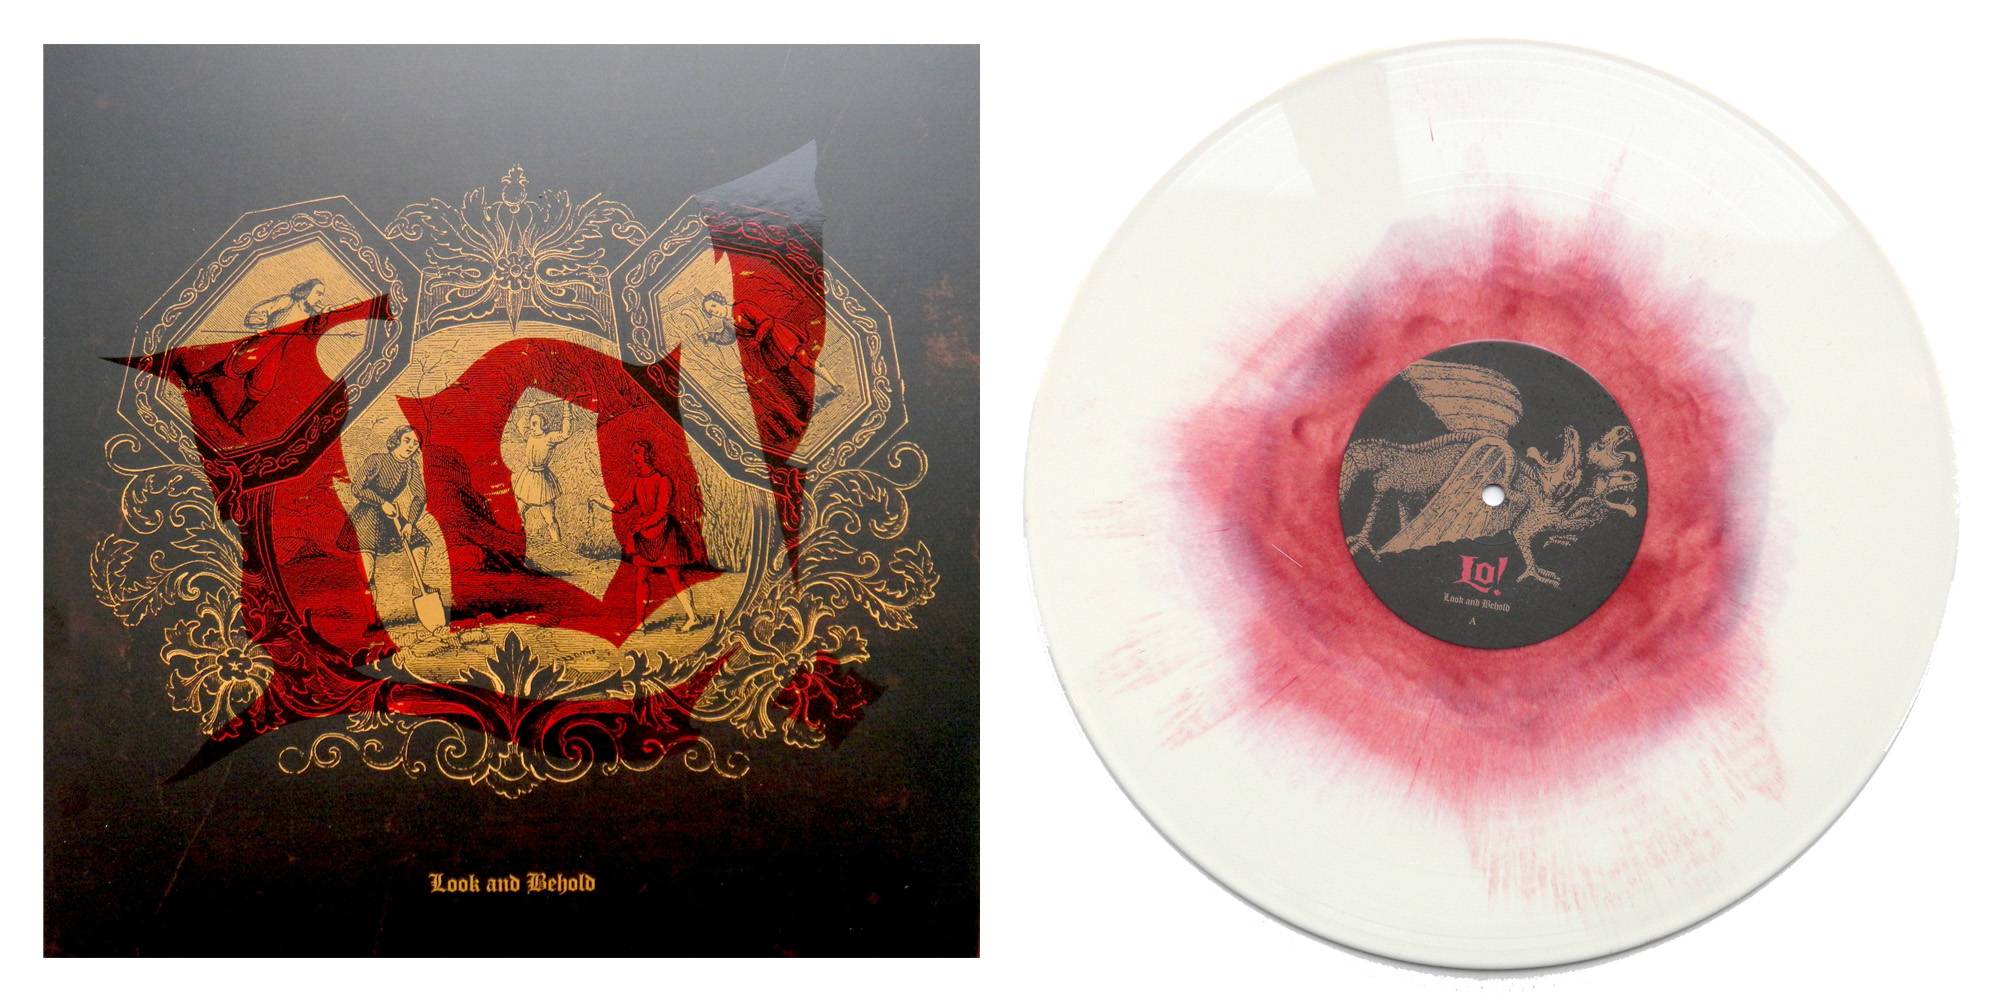 Lo! Look and Behold Vinyl